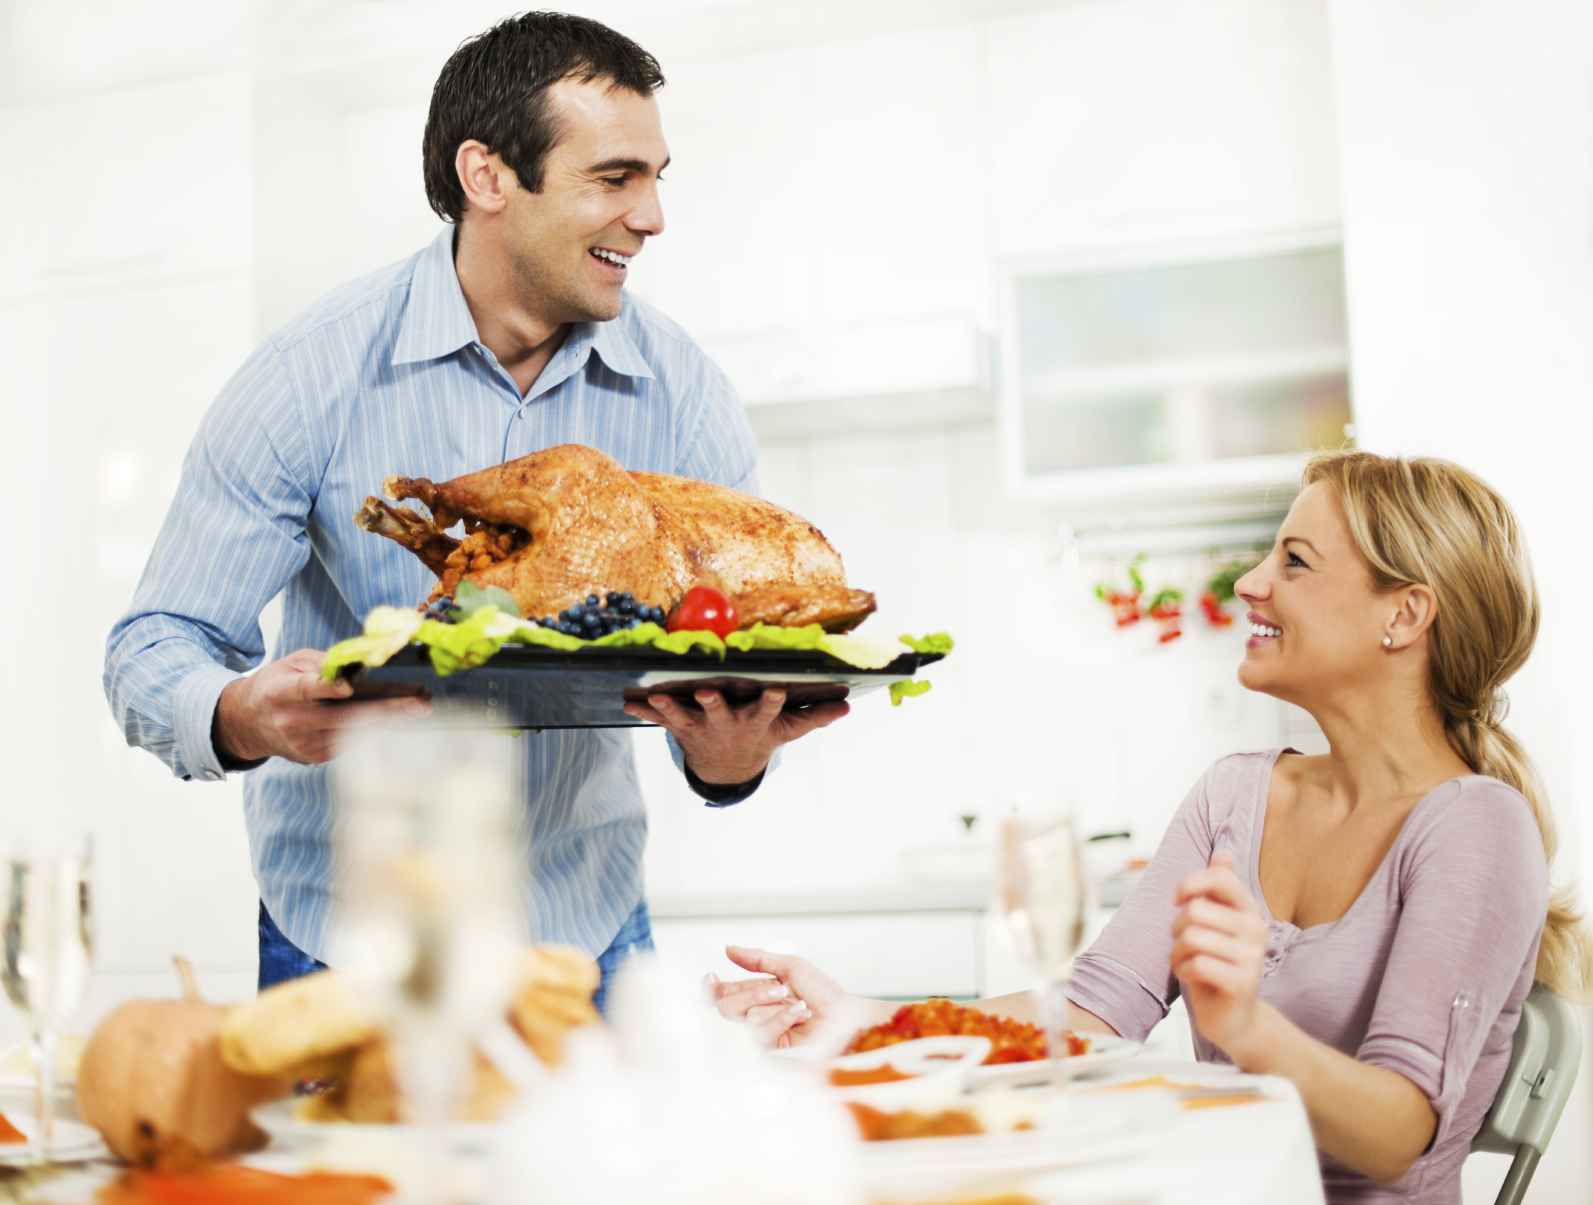 5 Romantic Ways To Spend Thanksgiving With Your Spouse